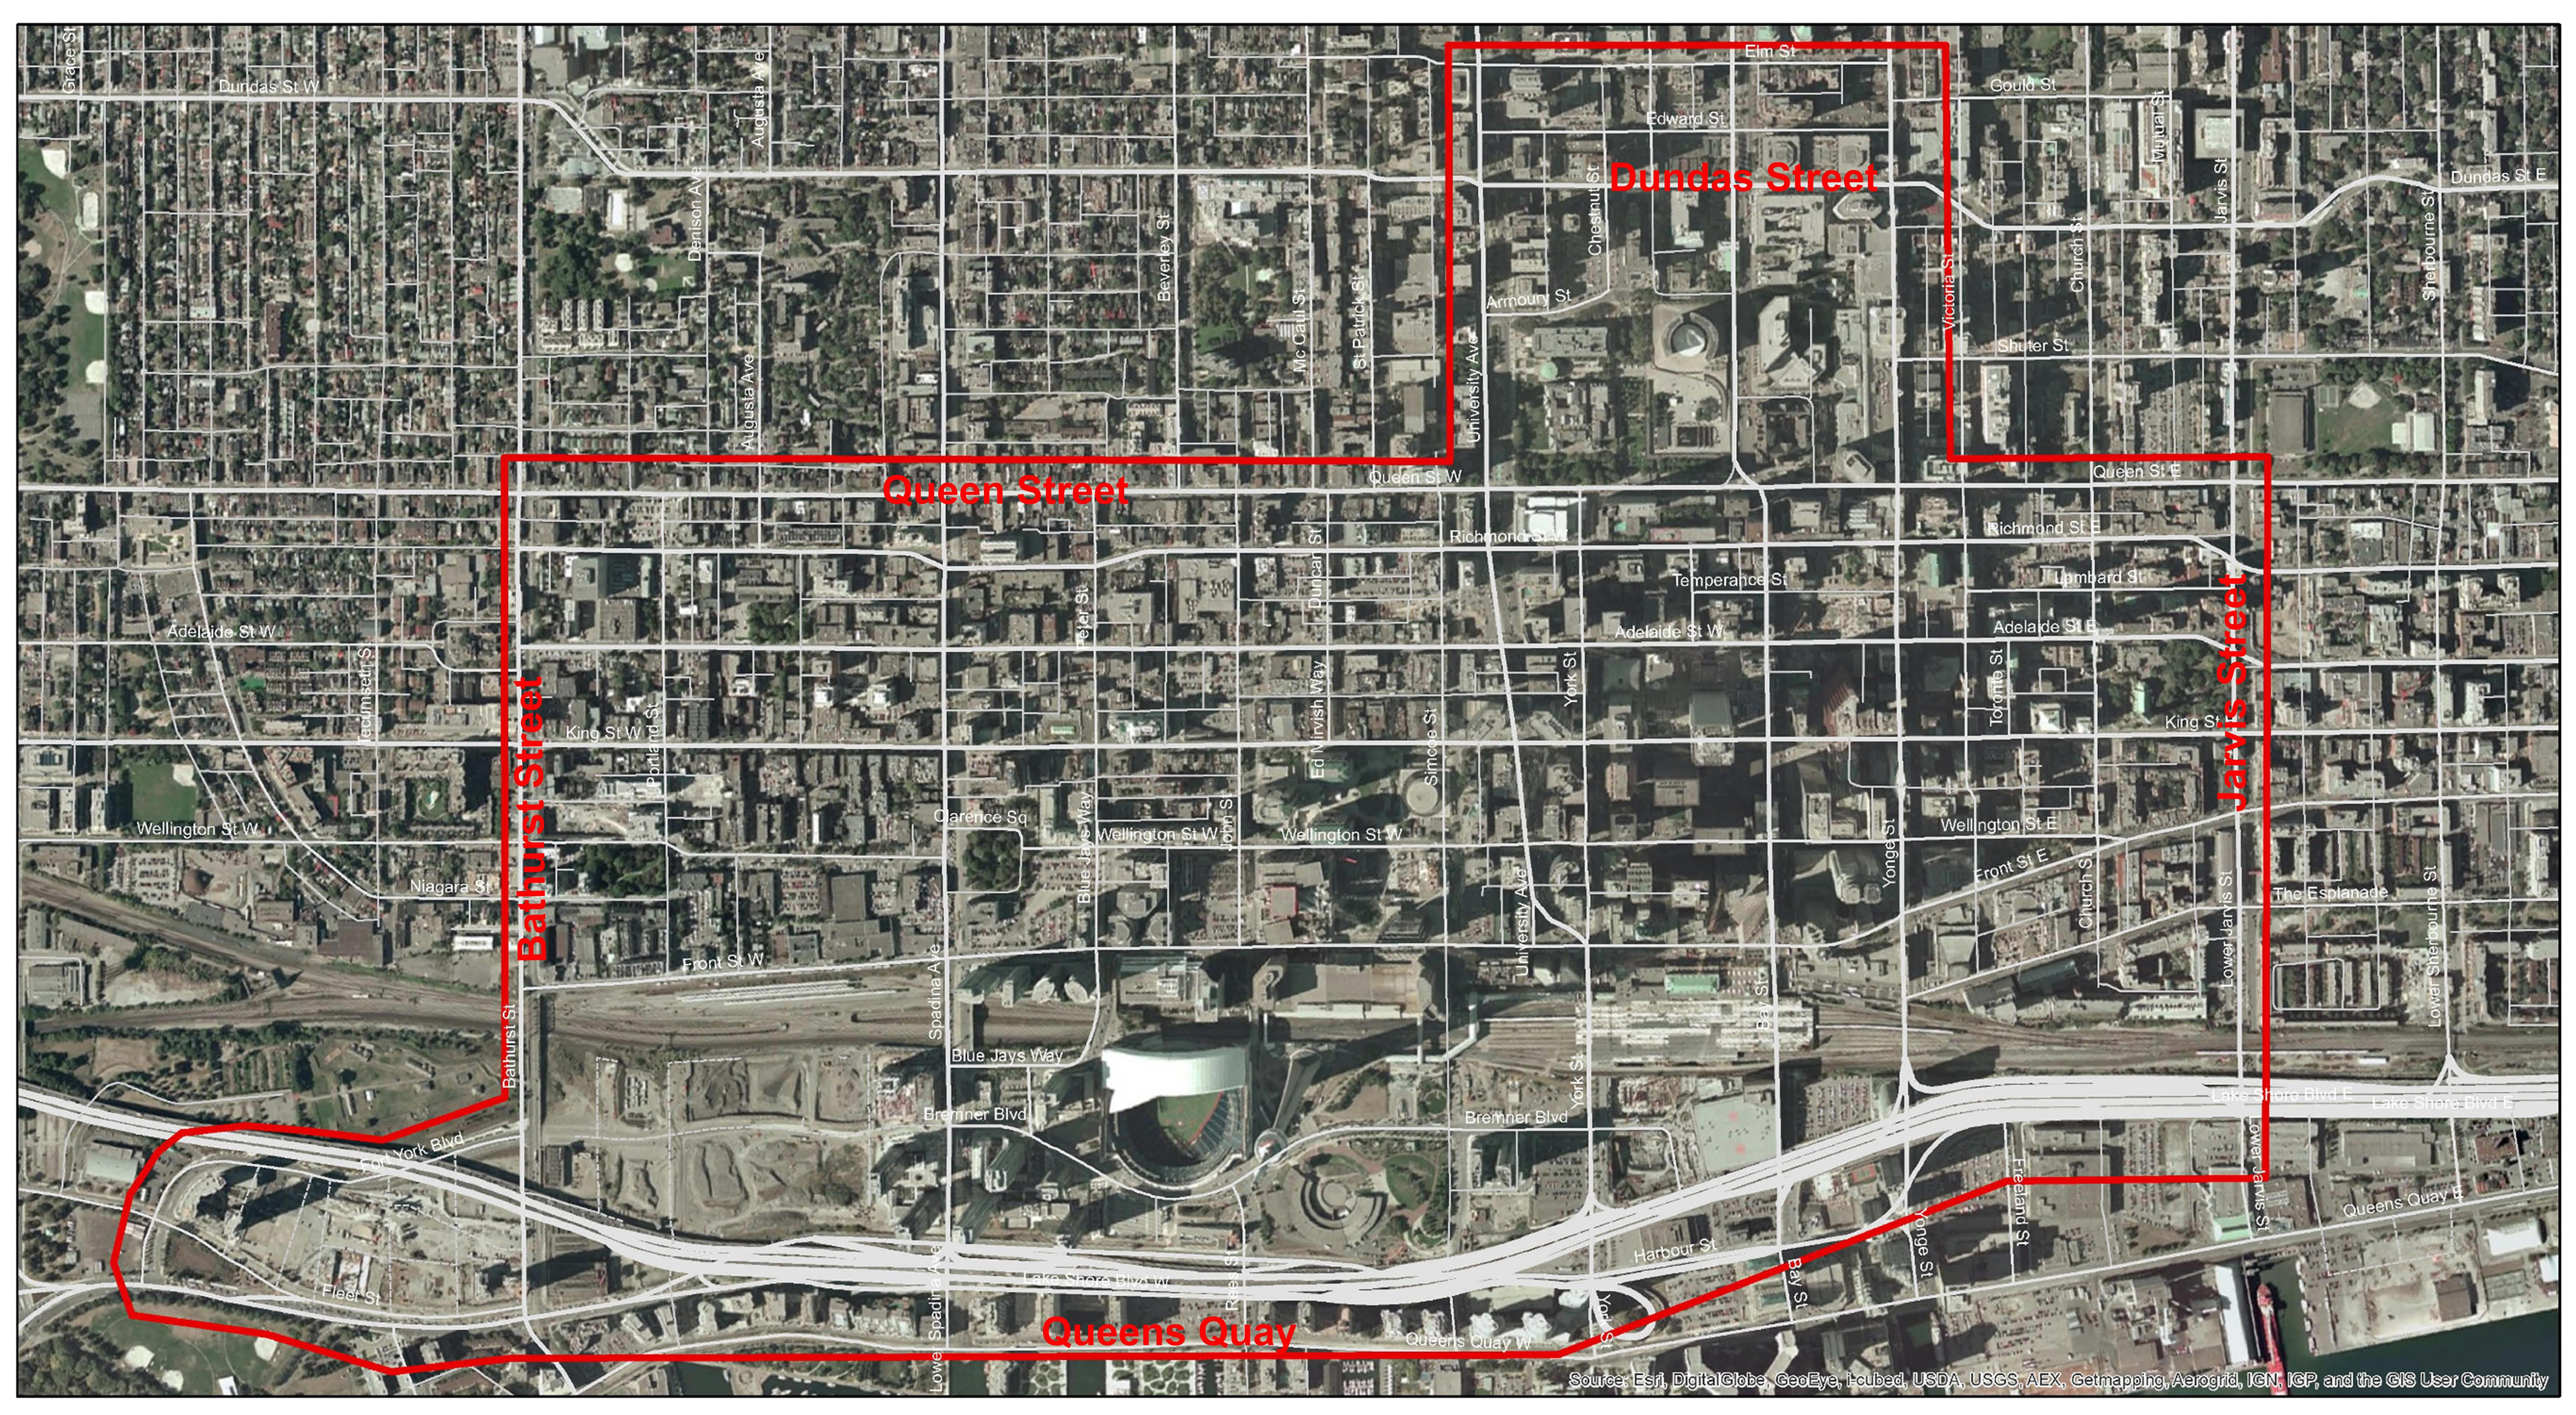 City of Toronto's map: Downtown Transportation Operations Study area's boundaries are highlighted in red.